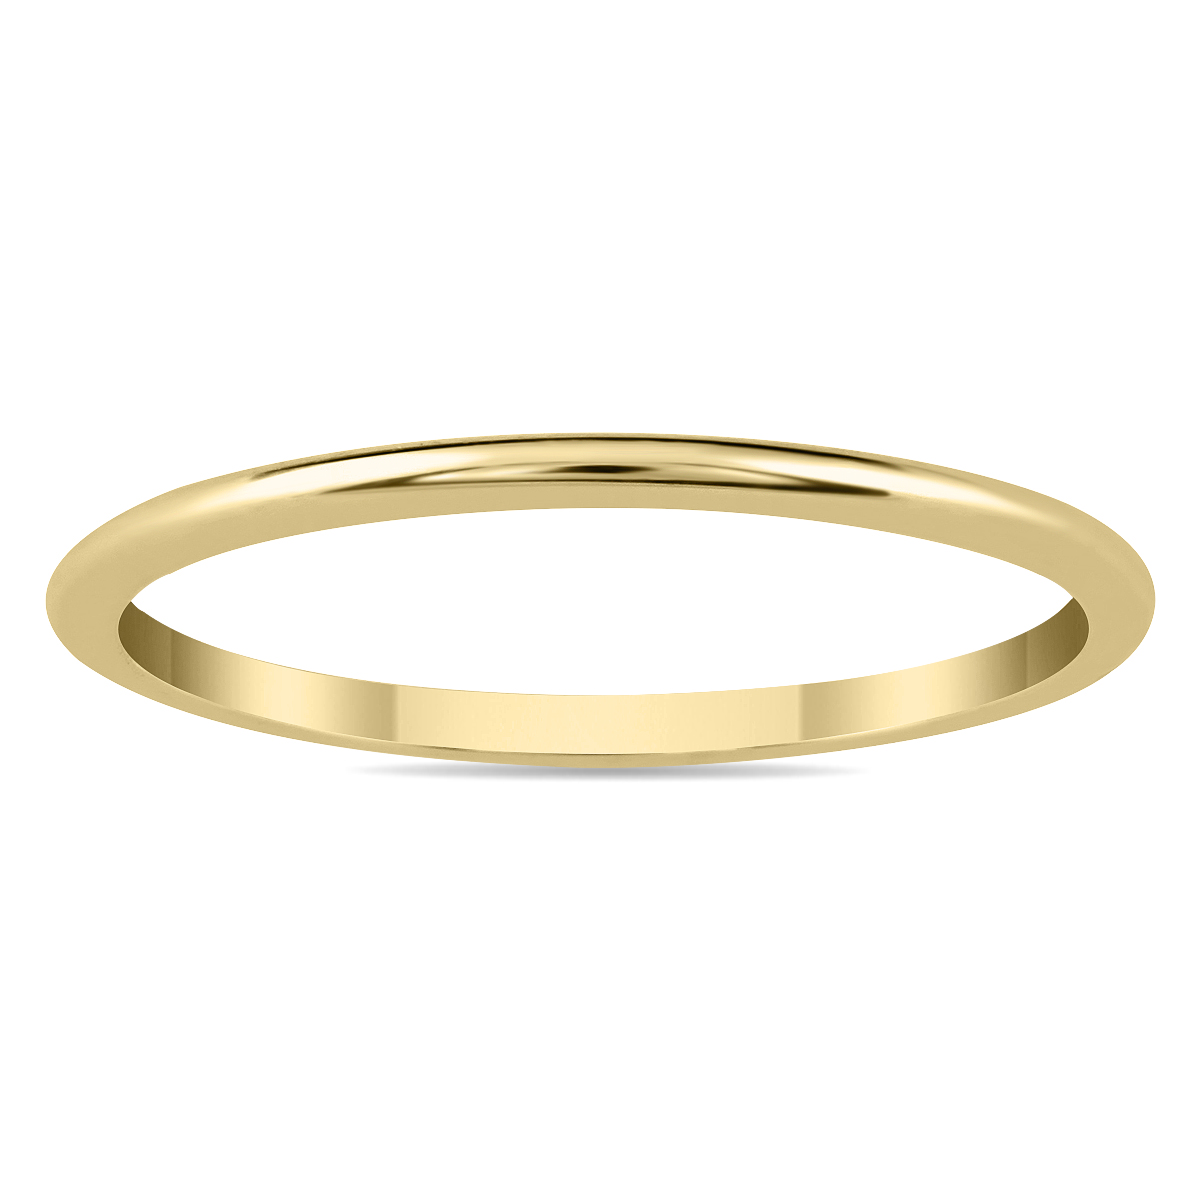 1mm Thin Domed Wedding Band in 14K Yellow Gold